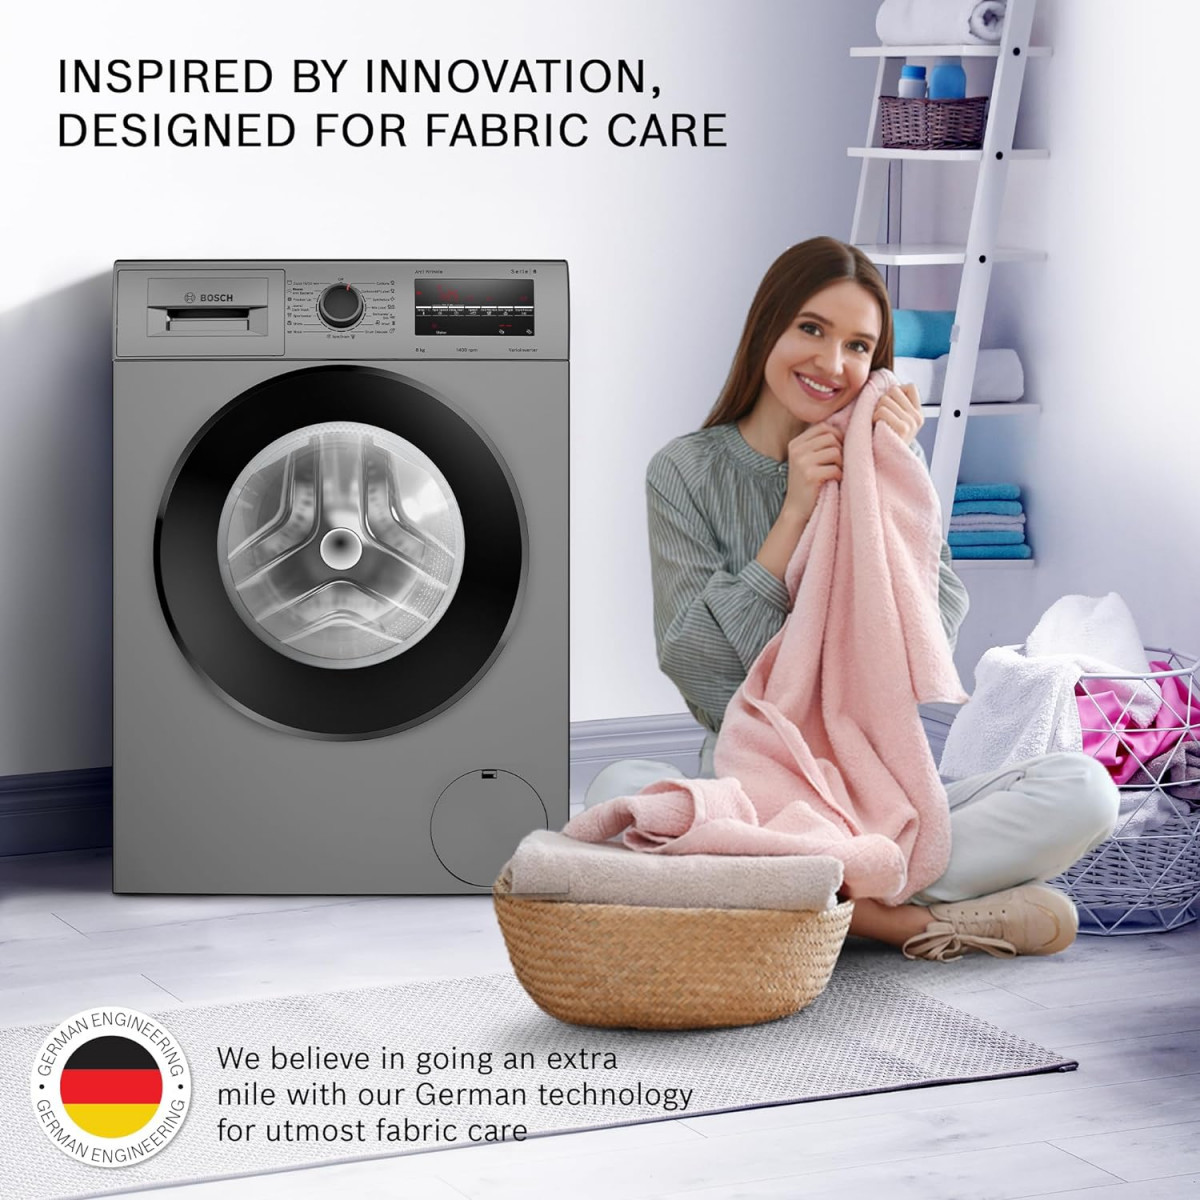 Bosch 8 kg 5 Star Fully-Automatic Front Loading Washing Machine WAJ2846PIN Titanium AI active water plus In-Built Heater